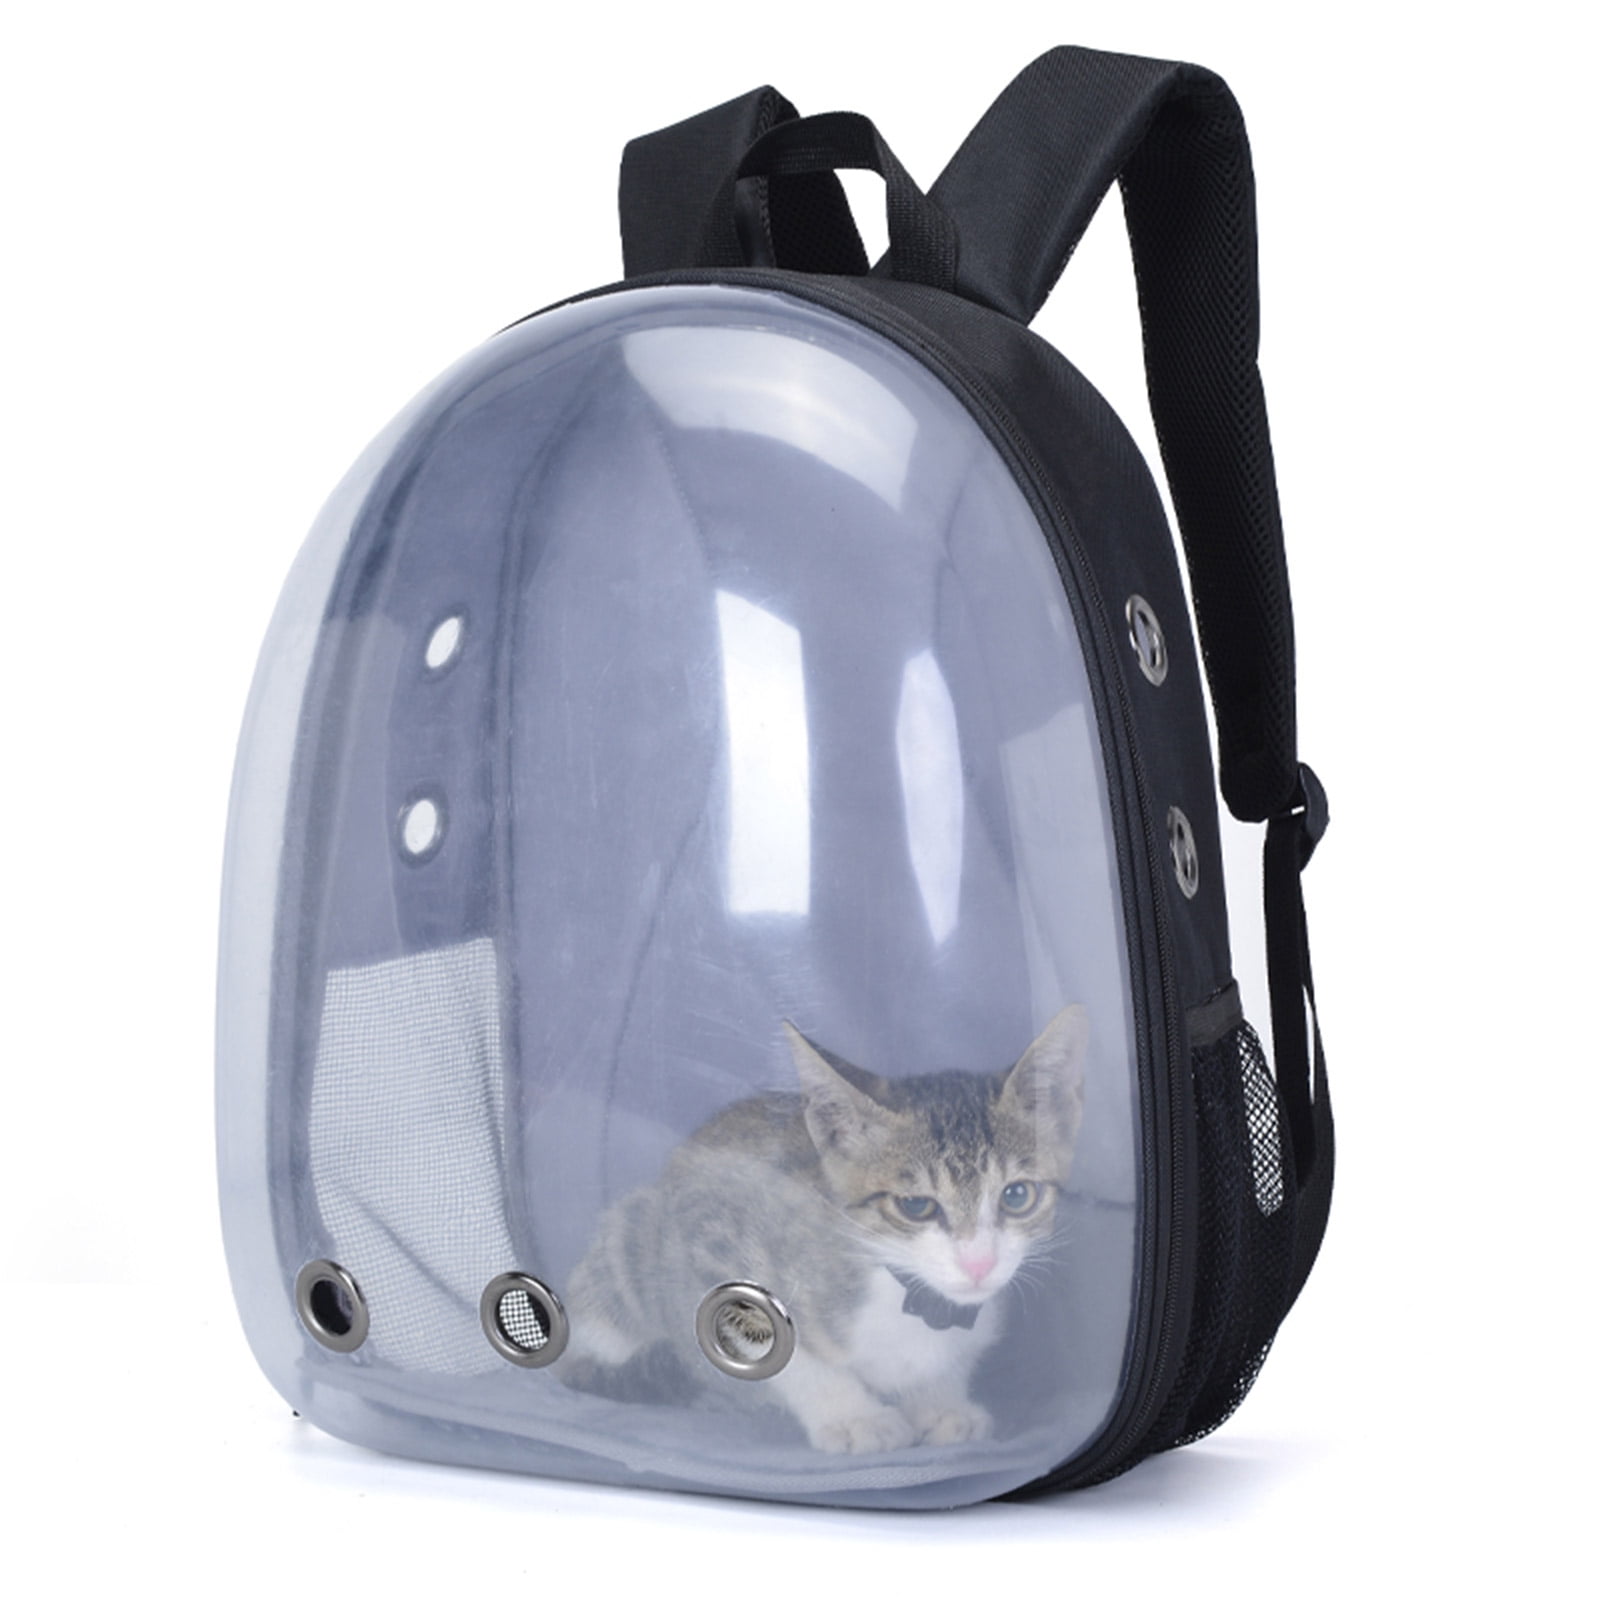 Ventilate Transparent Dog Carrier Backpack Crafttable Cat Backpack Carrier Bubble Bag Black Expandable with Breathable